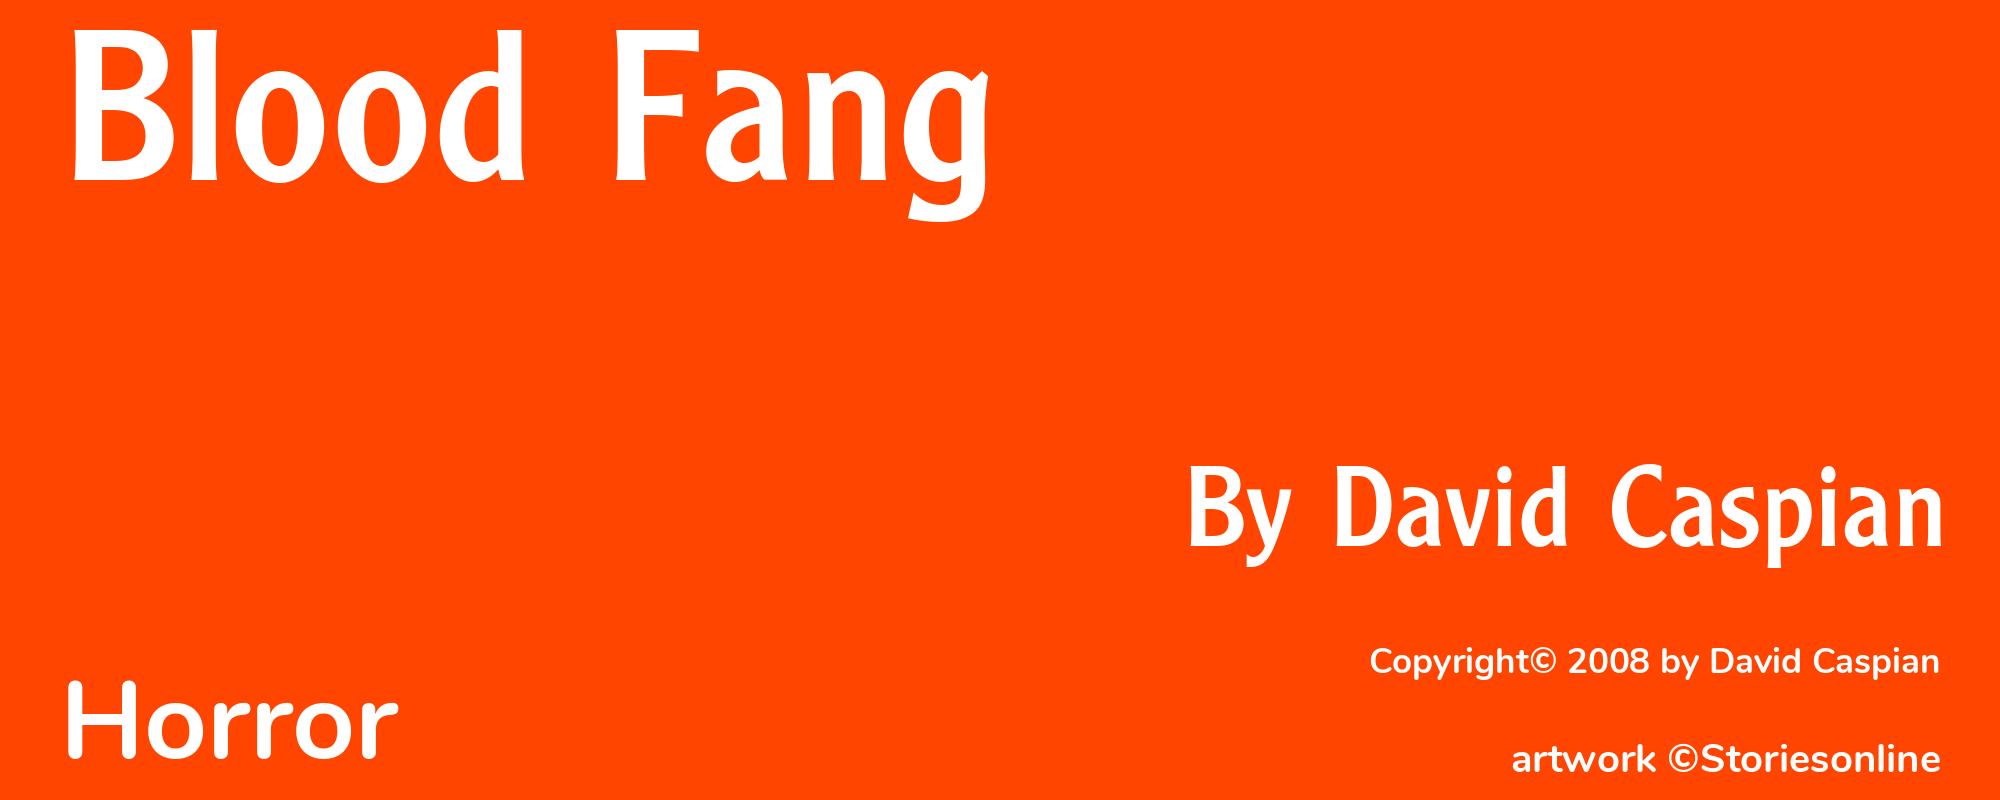 Blood Fang - Cover